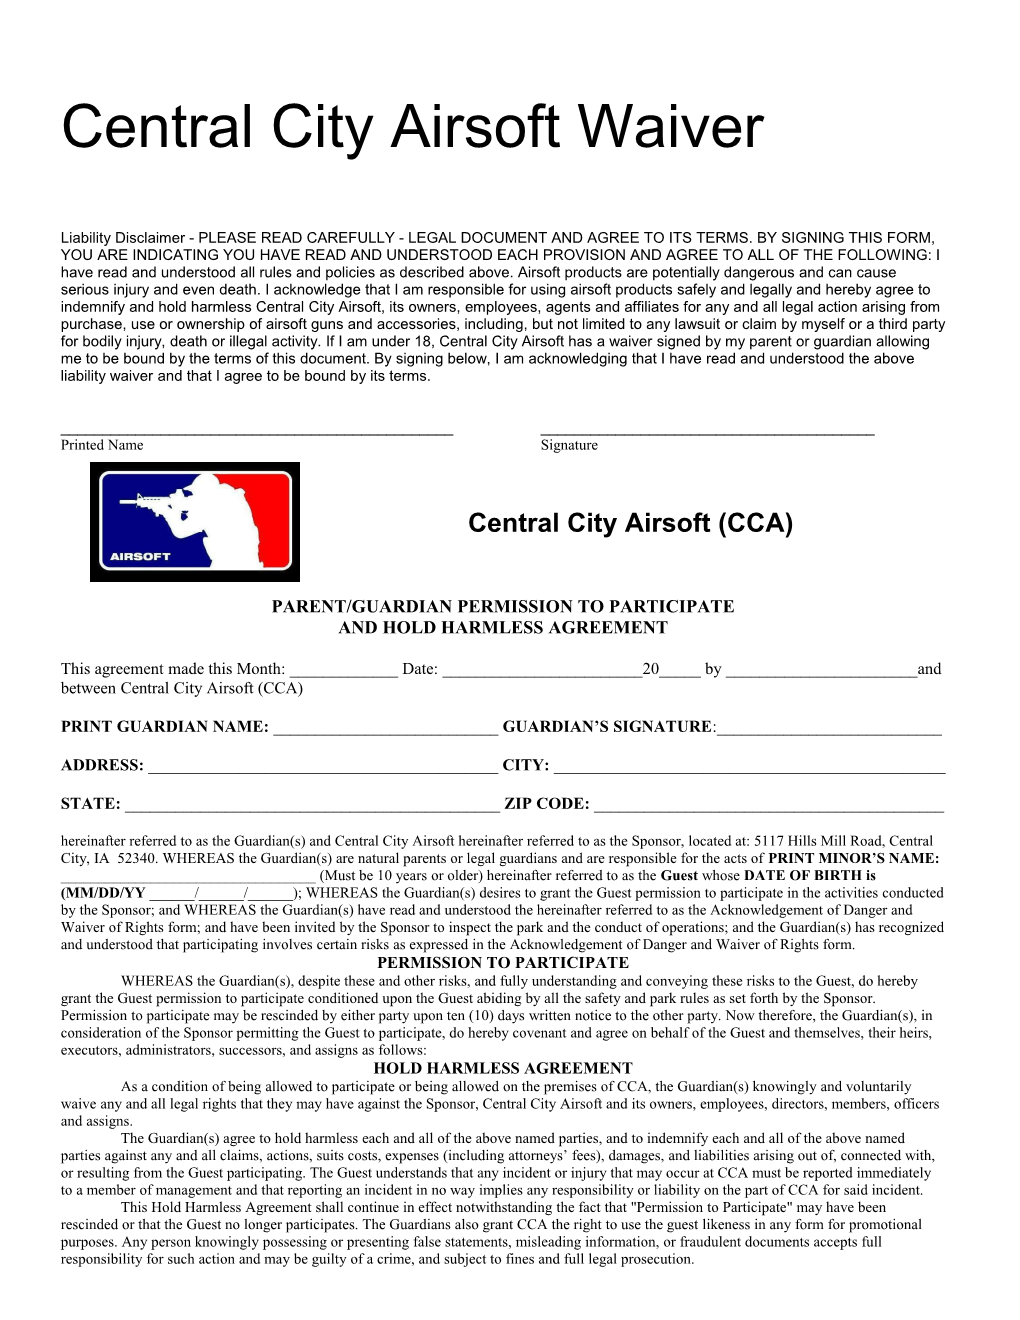 Central City Airsoft Waiver